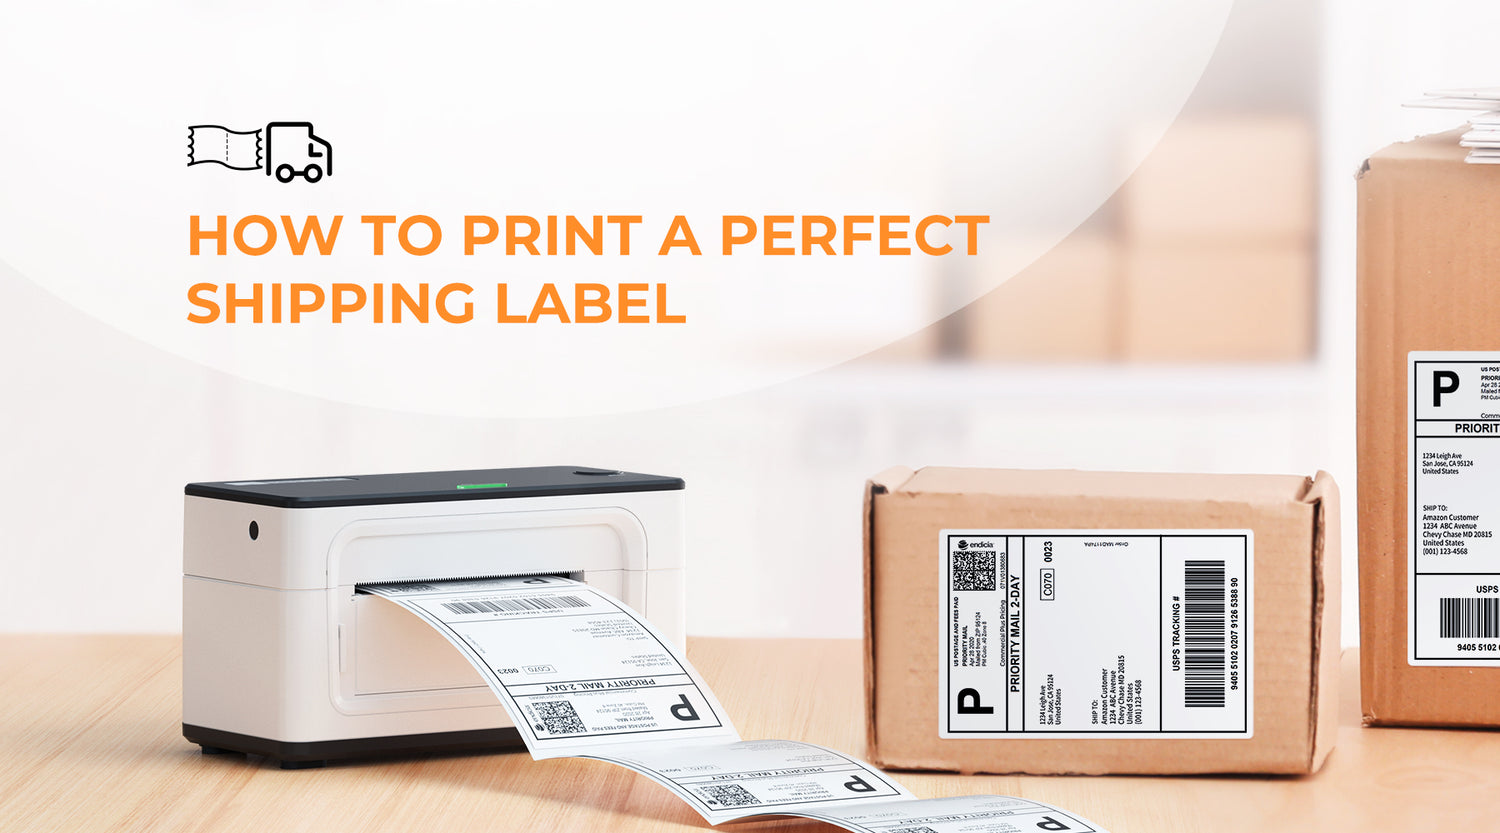 4 factors to print perfect shipping labels